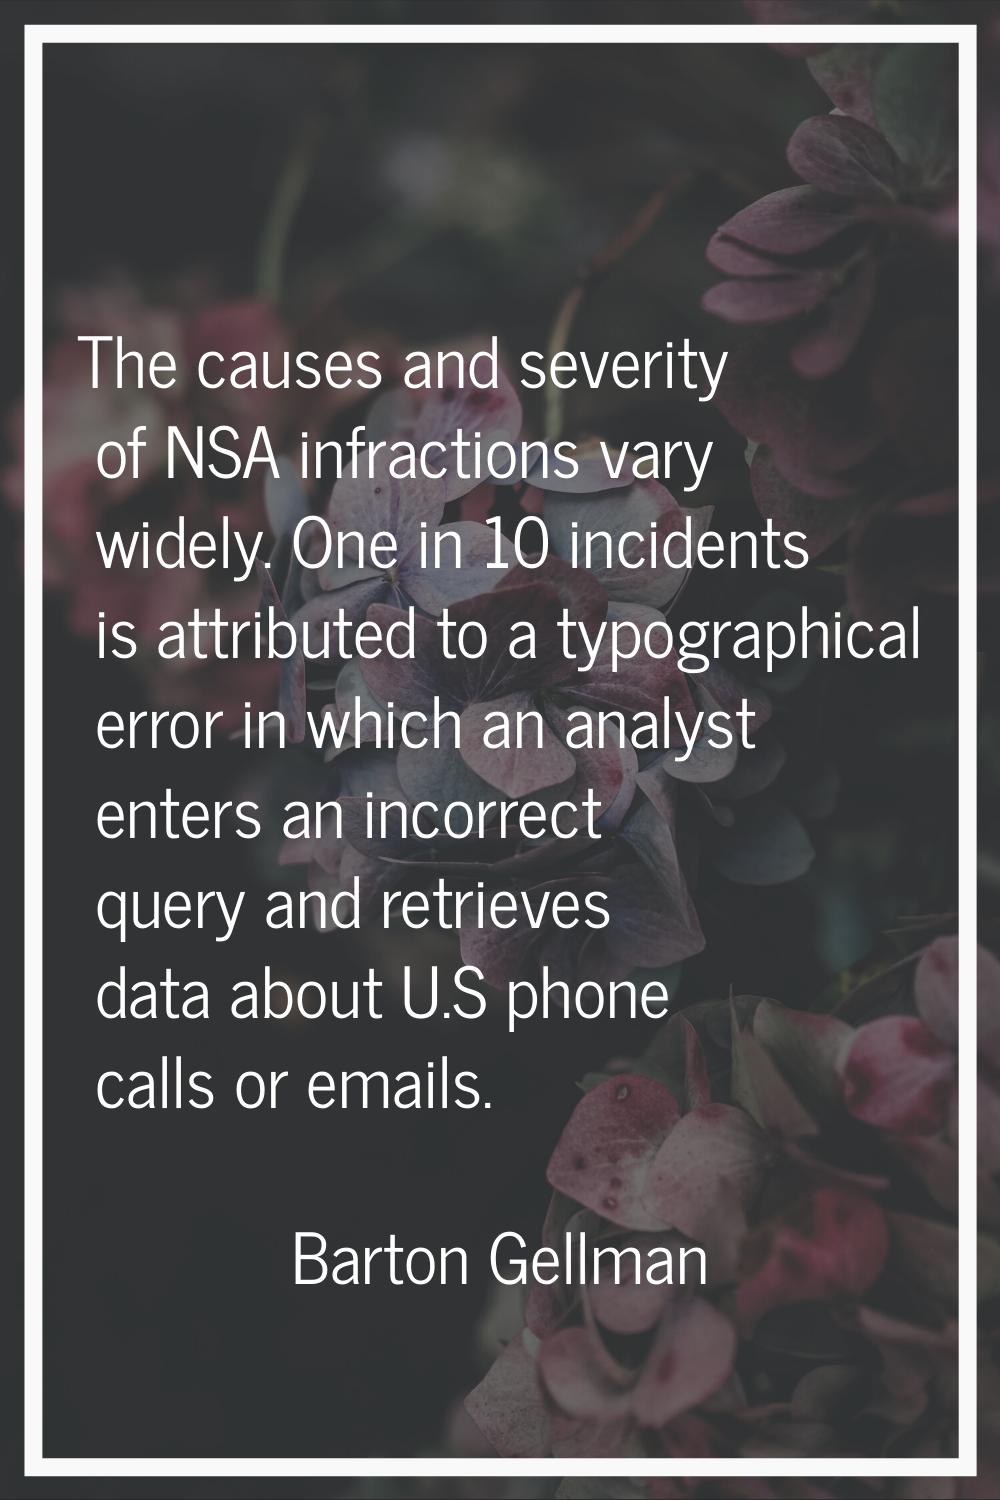 The causes and severity of NSA infractions vary widely. One in 10 incidents is attributed to a typo